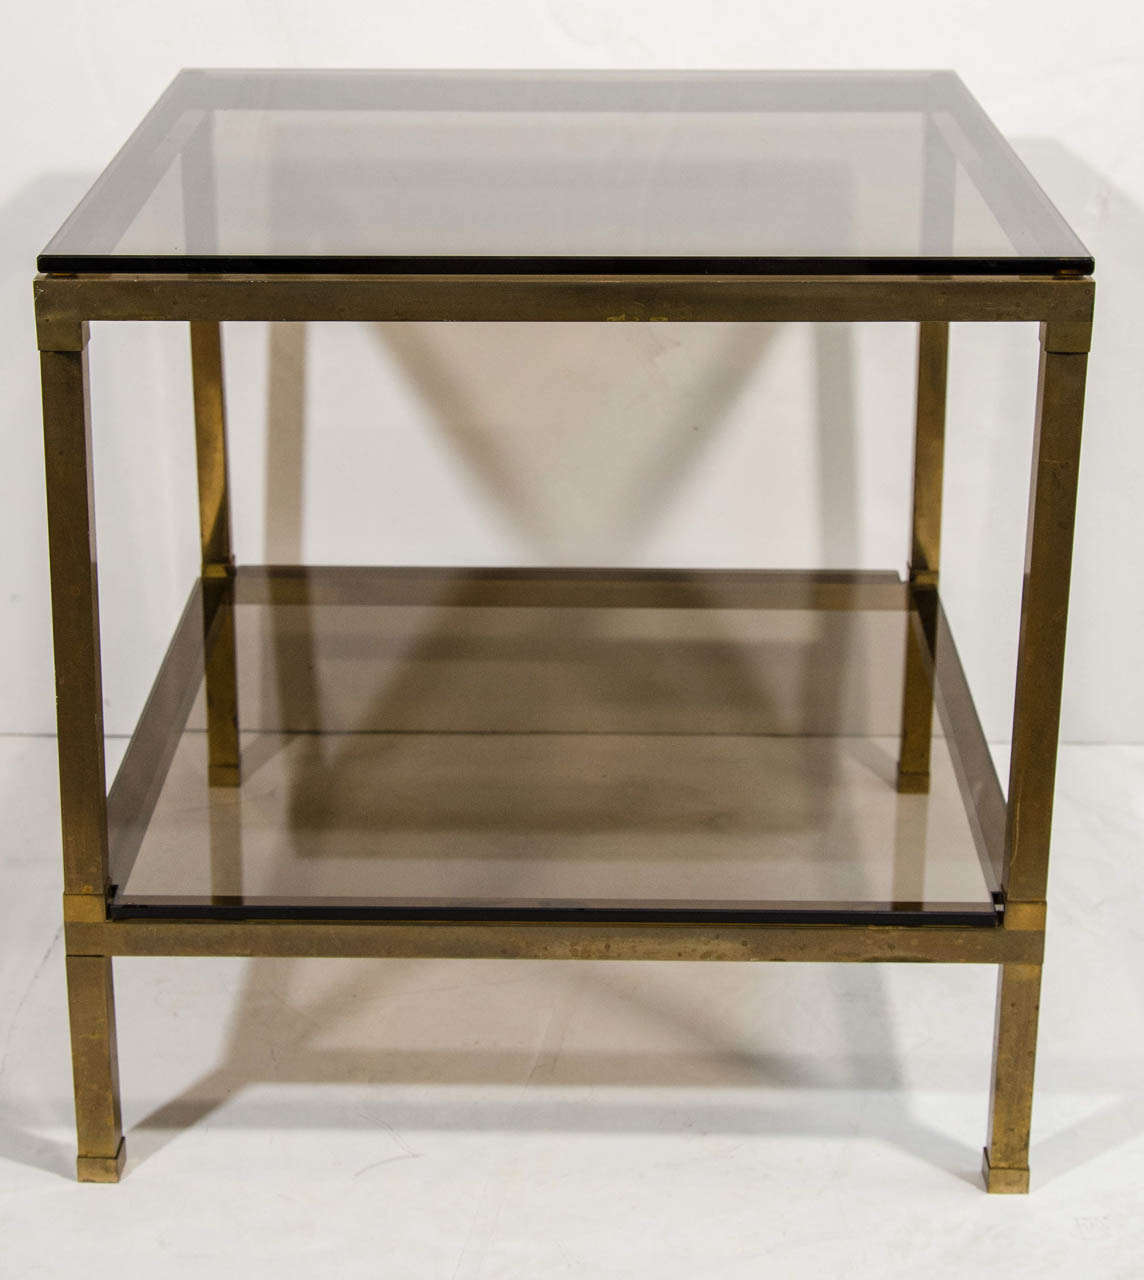 Pair of mid century modern end tables with two tier design in dark patinated brass metal with dense smoked bronze glass tops. The end tables have a great weight to them and have wonderful cube forms. Make great night stand option.